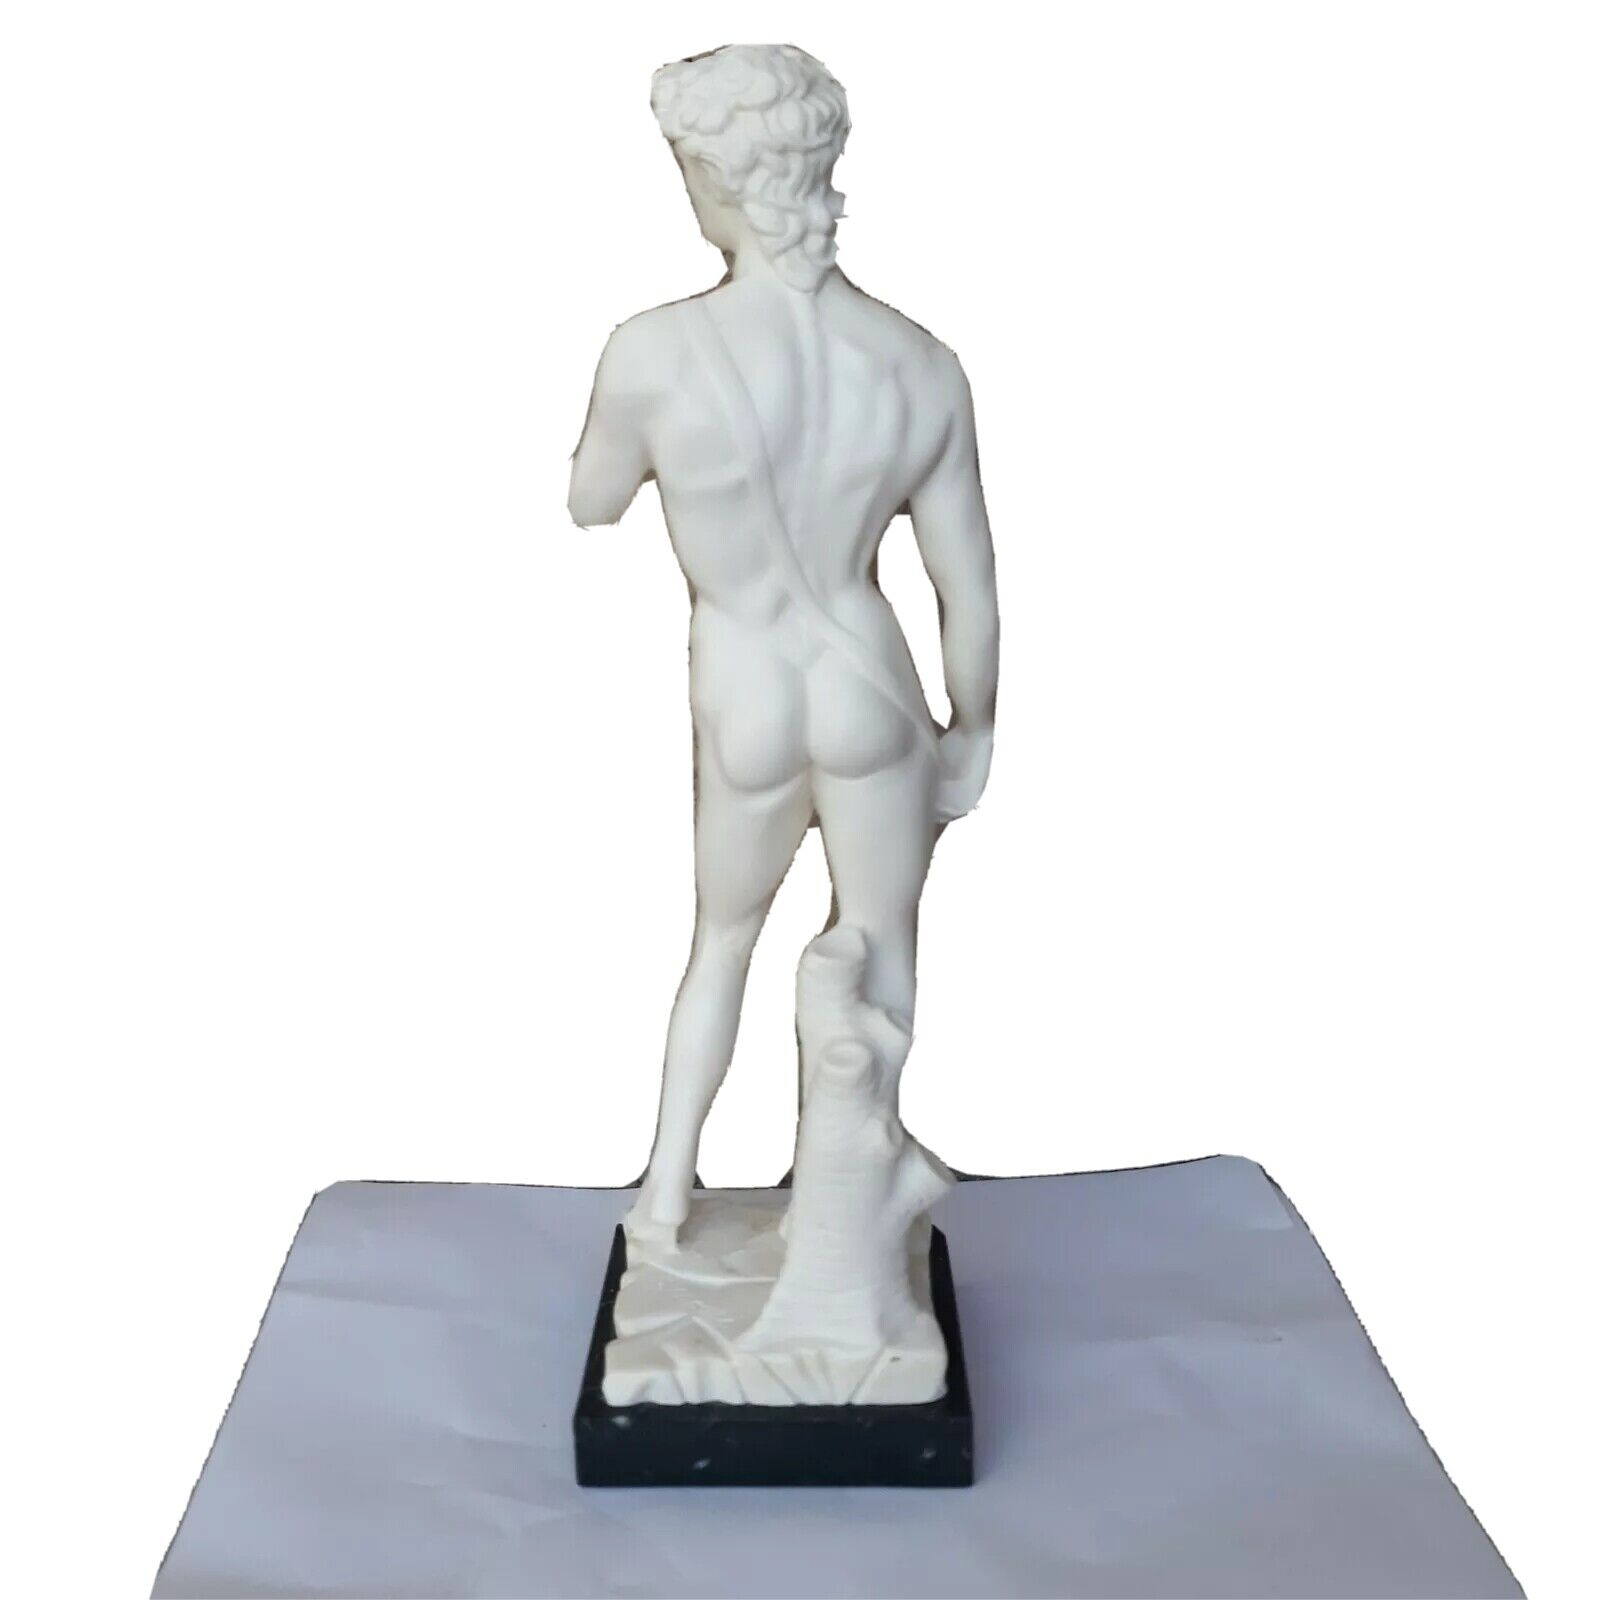 VINTAGE DAVID  Resin Figurine Sculpture with Marble base G. Carusi